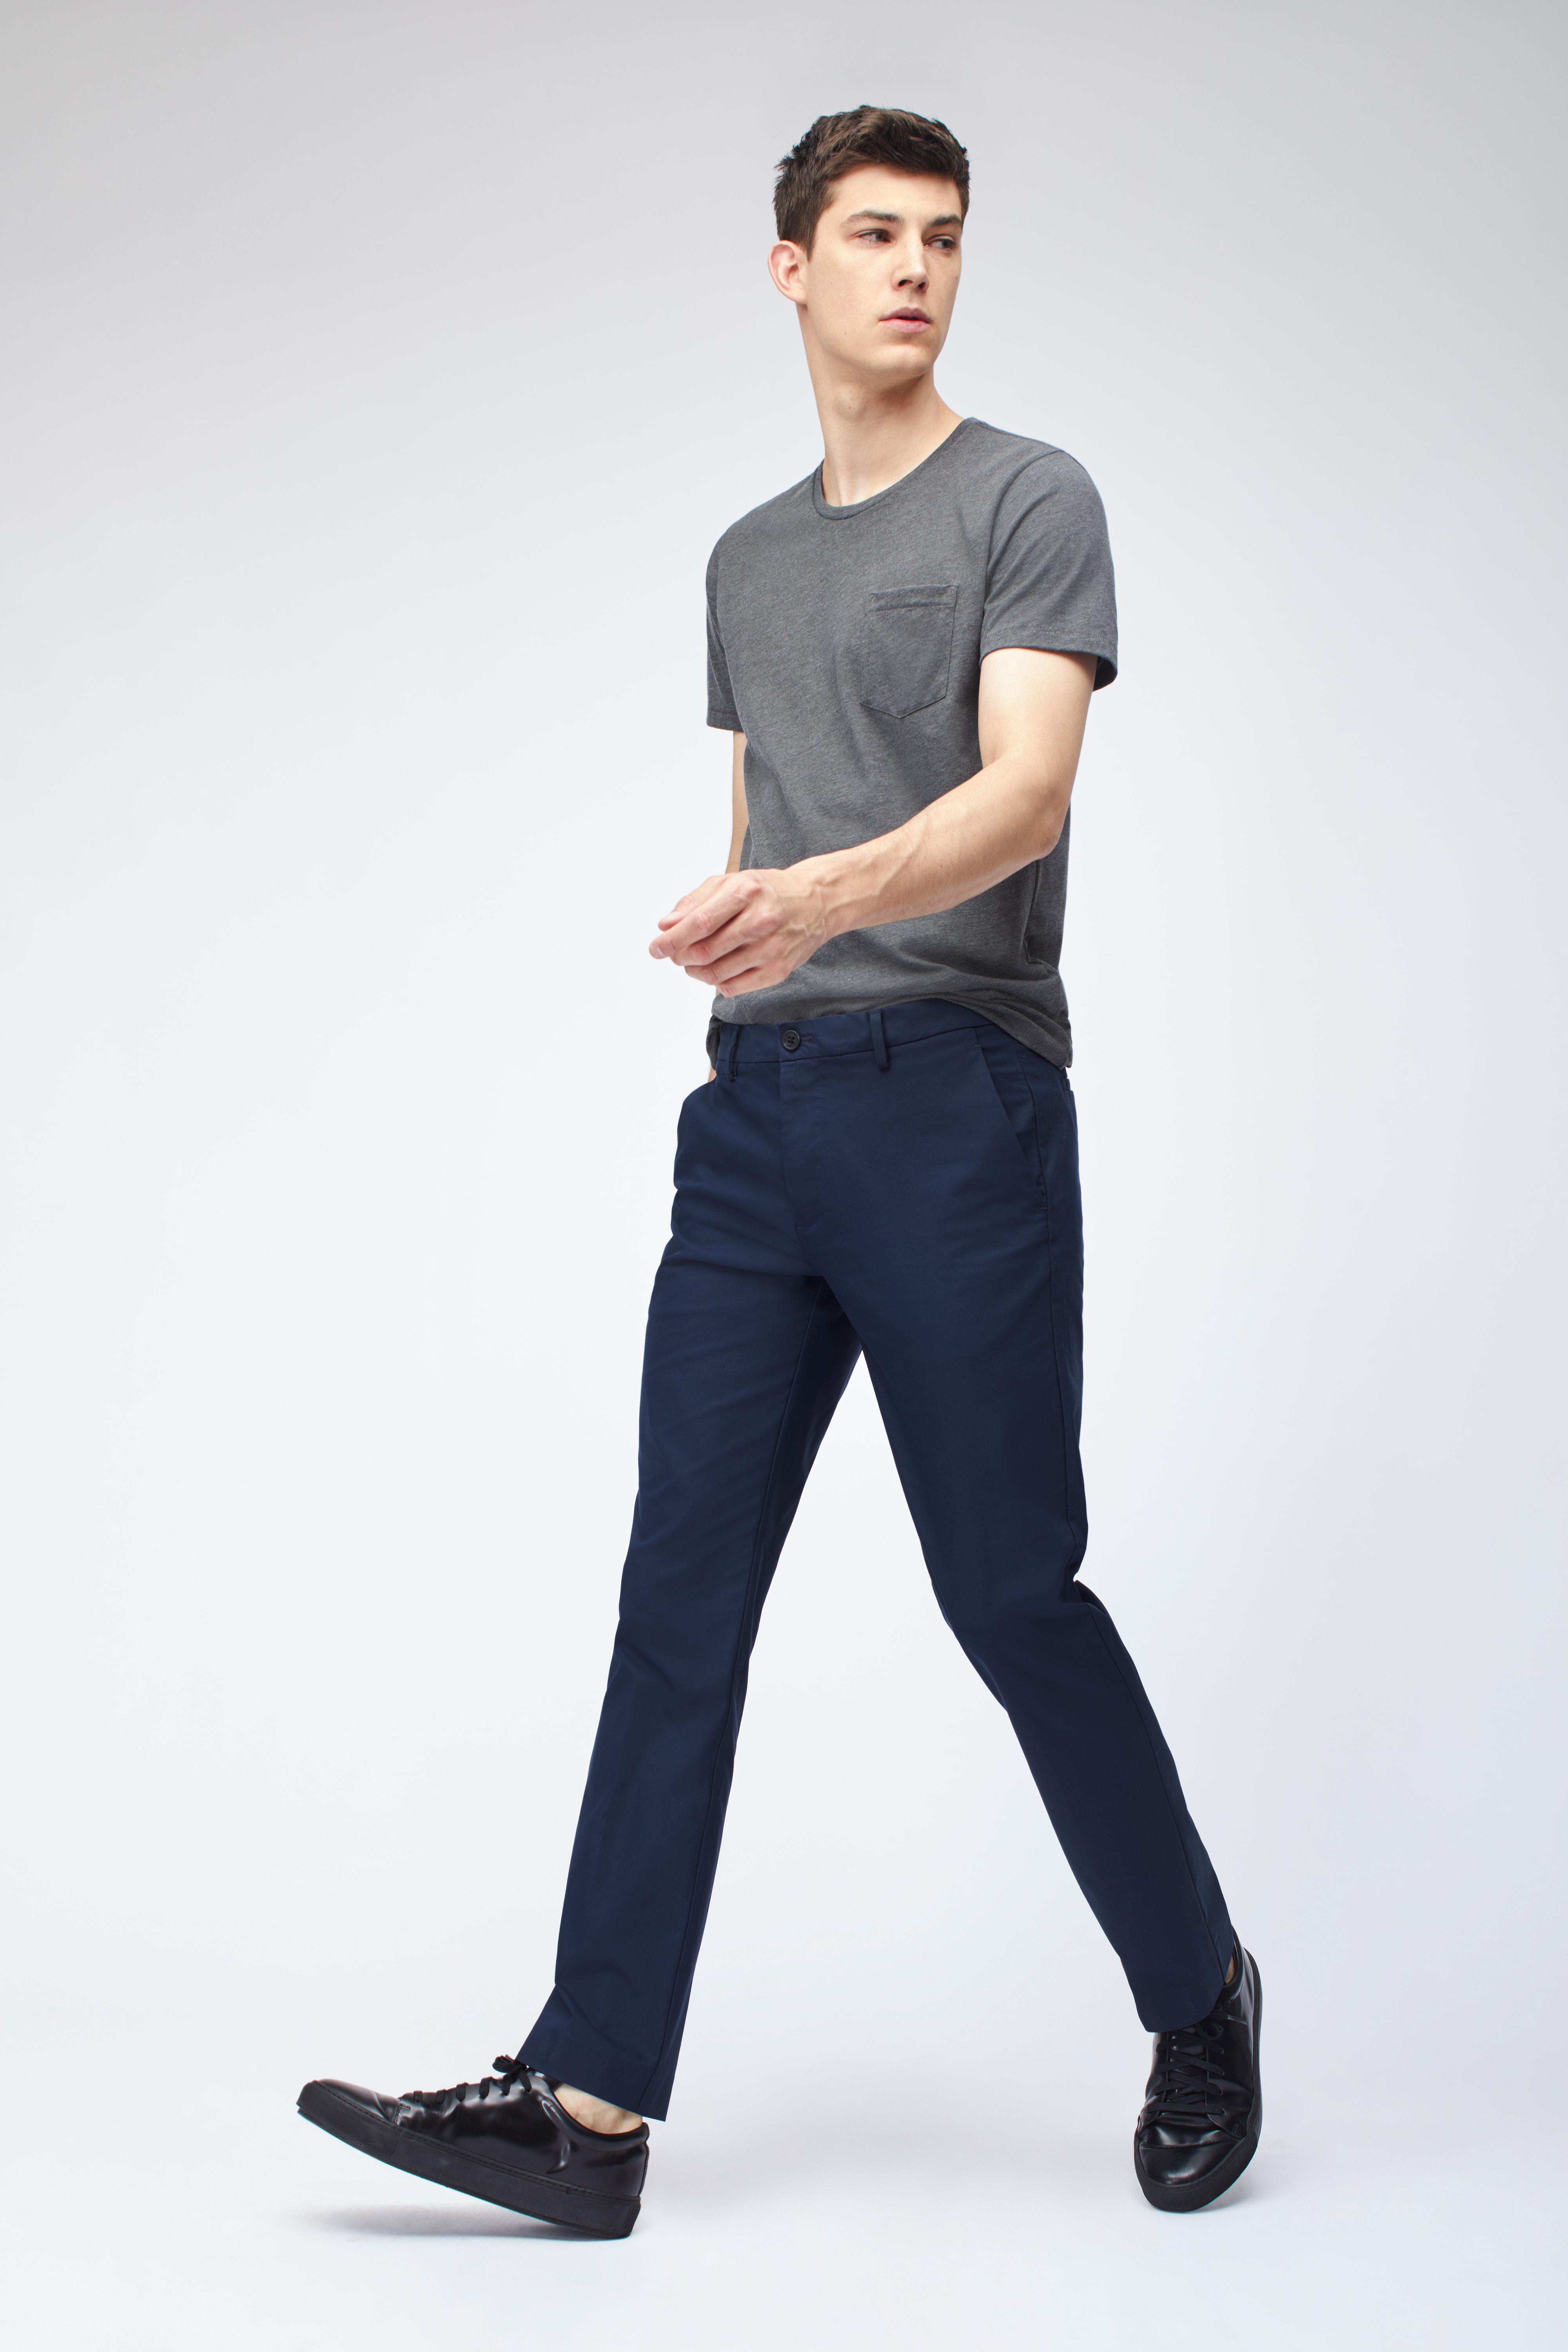 Bonobos Cotton Tech Chinos in Navy (Blue) for Men - Lyst